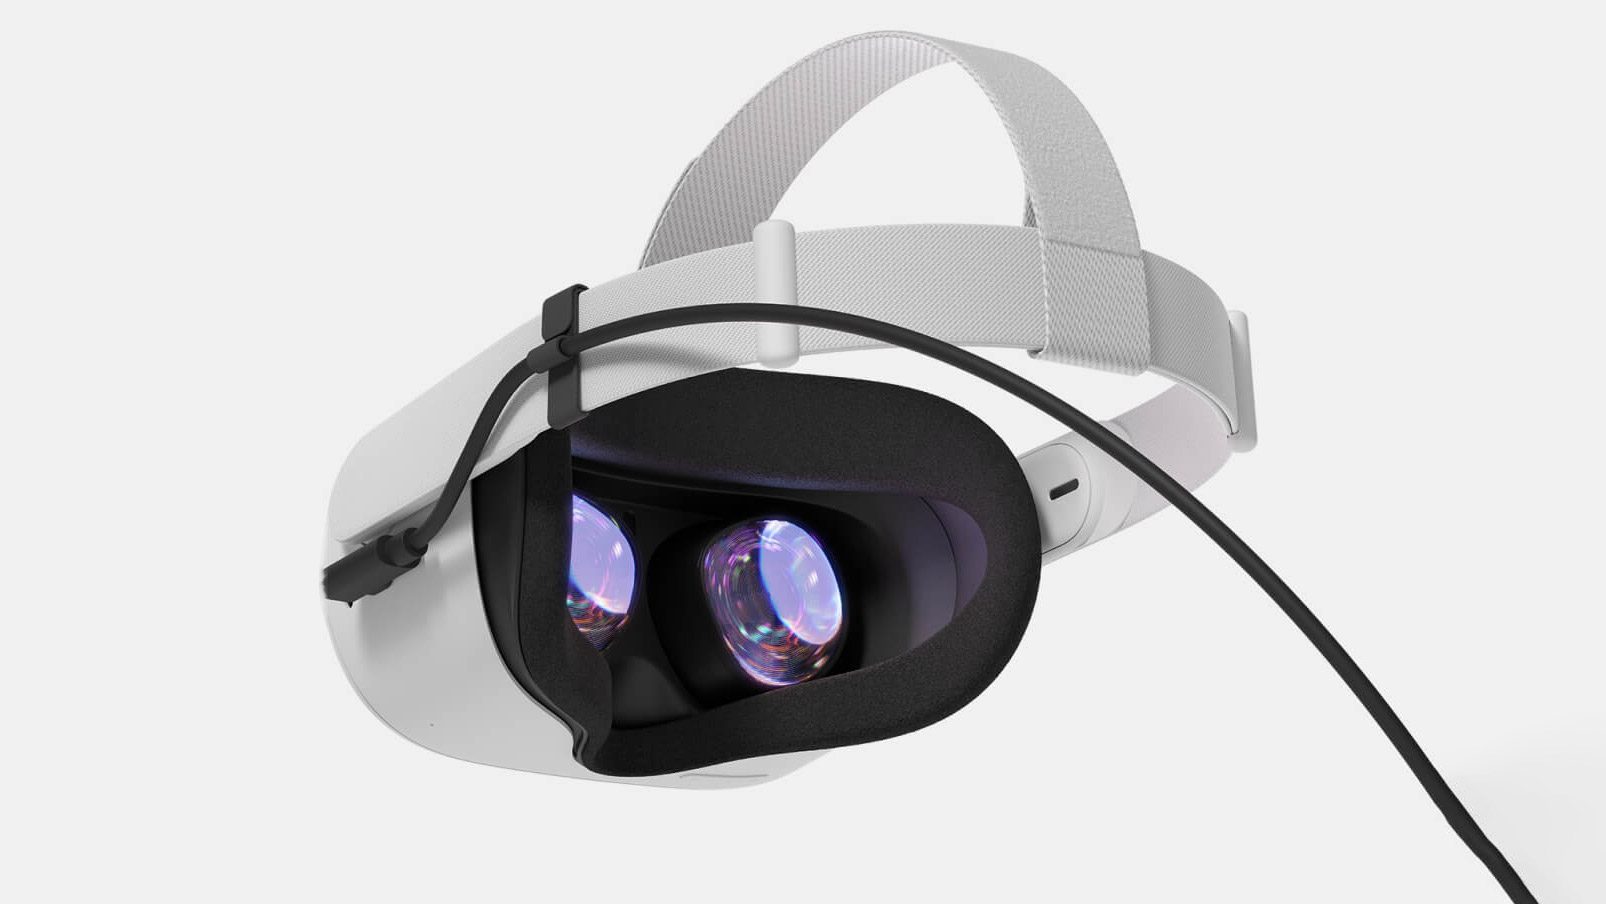 SteamVR Improves Link & Air Link Reliability, Quest 2 Exceeds 30% of Headsets on